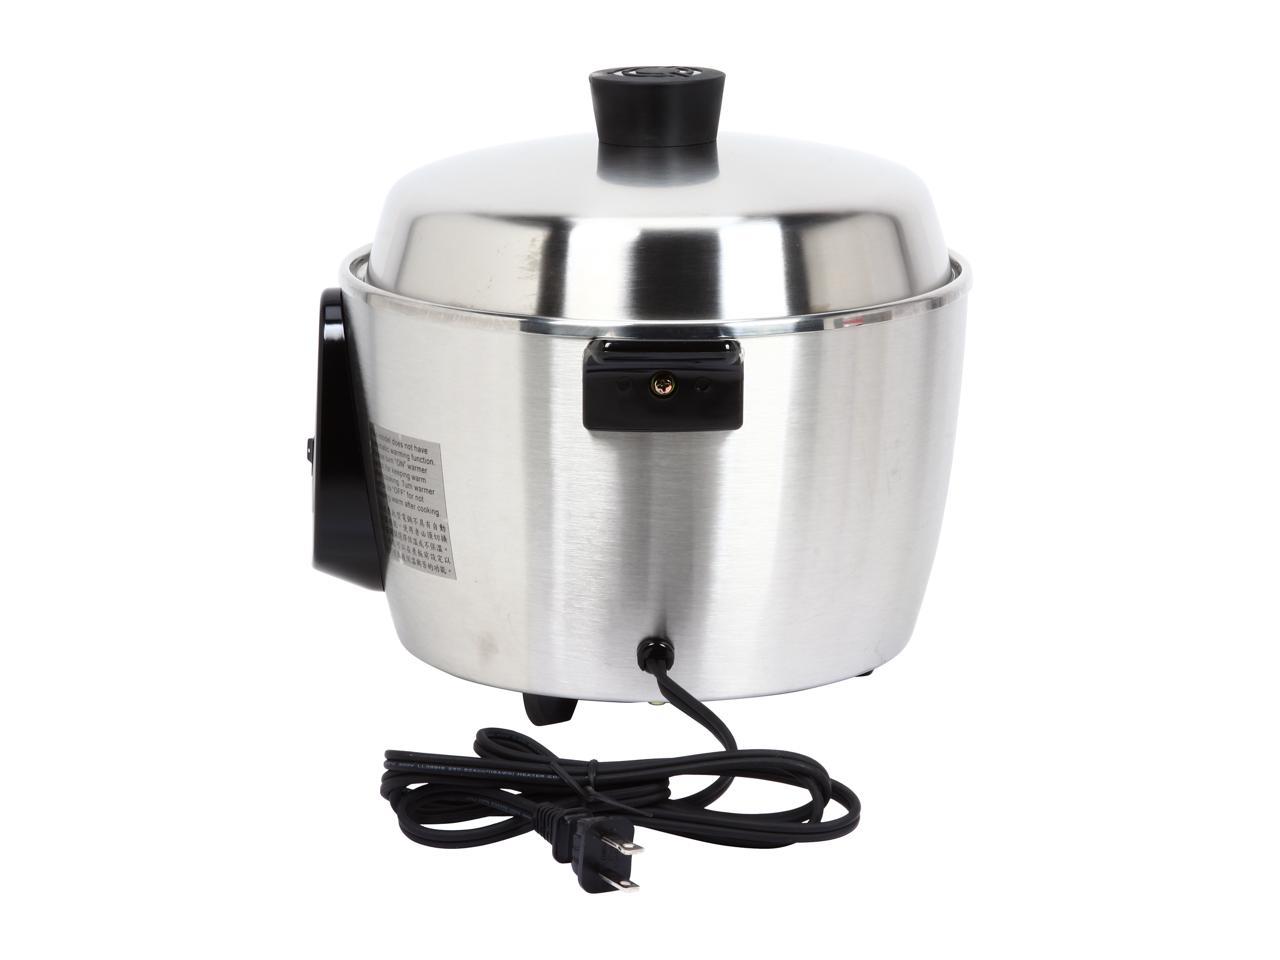 Tatung Stainless Steel Multi-Functional Rice Cooker and Steamer 6-cup